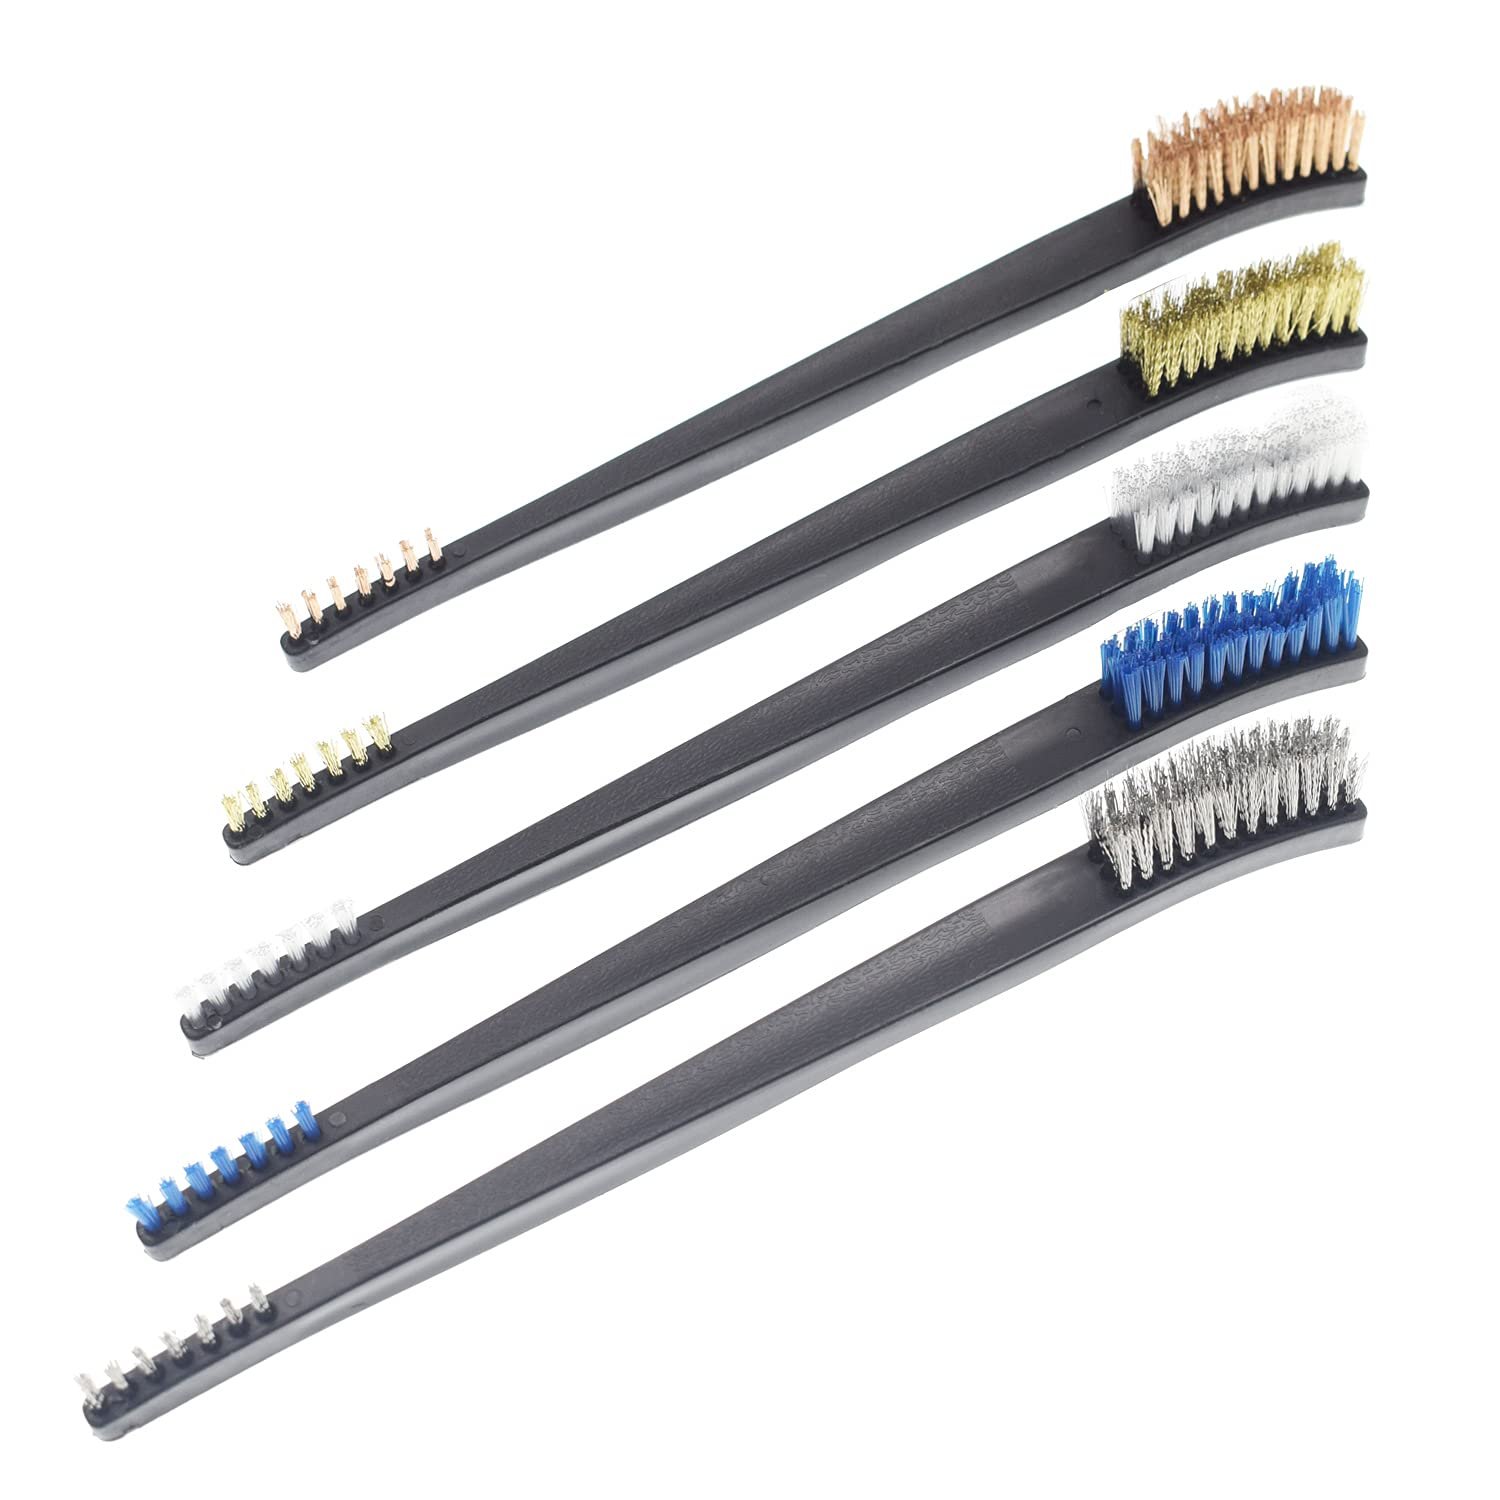 10-Pack Gun Cleaning Brushes Review